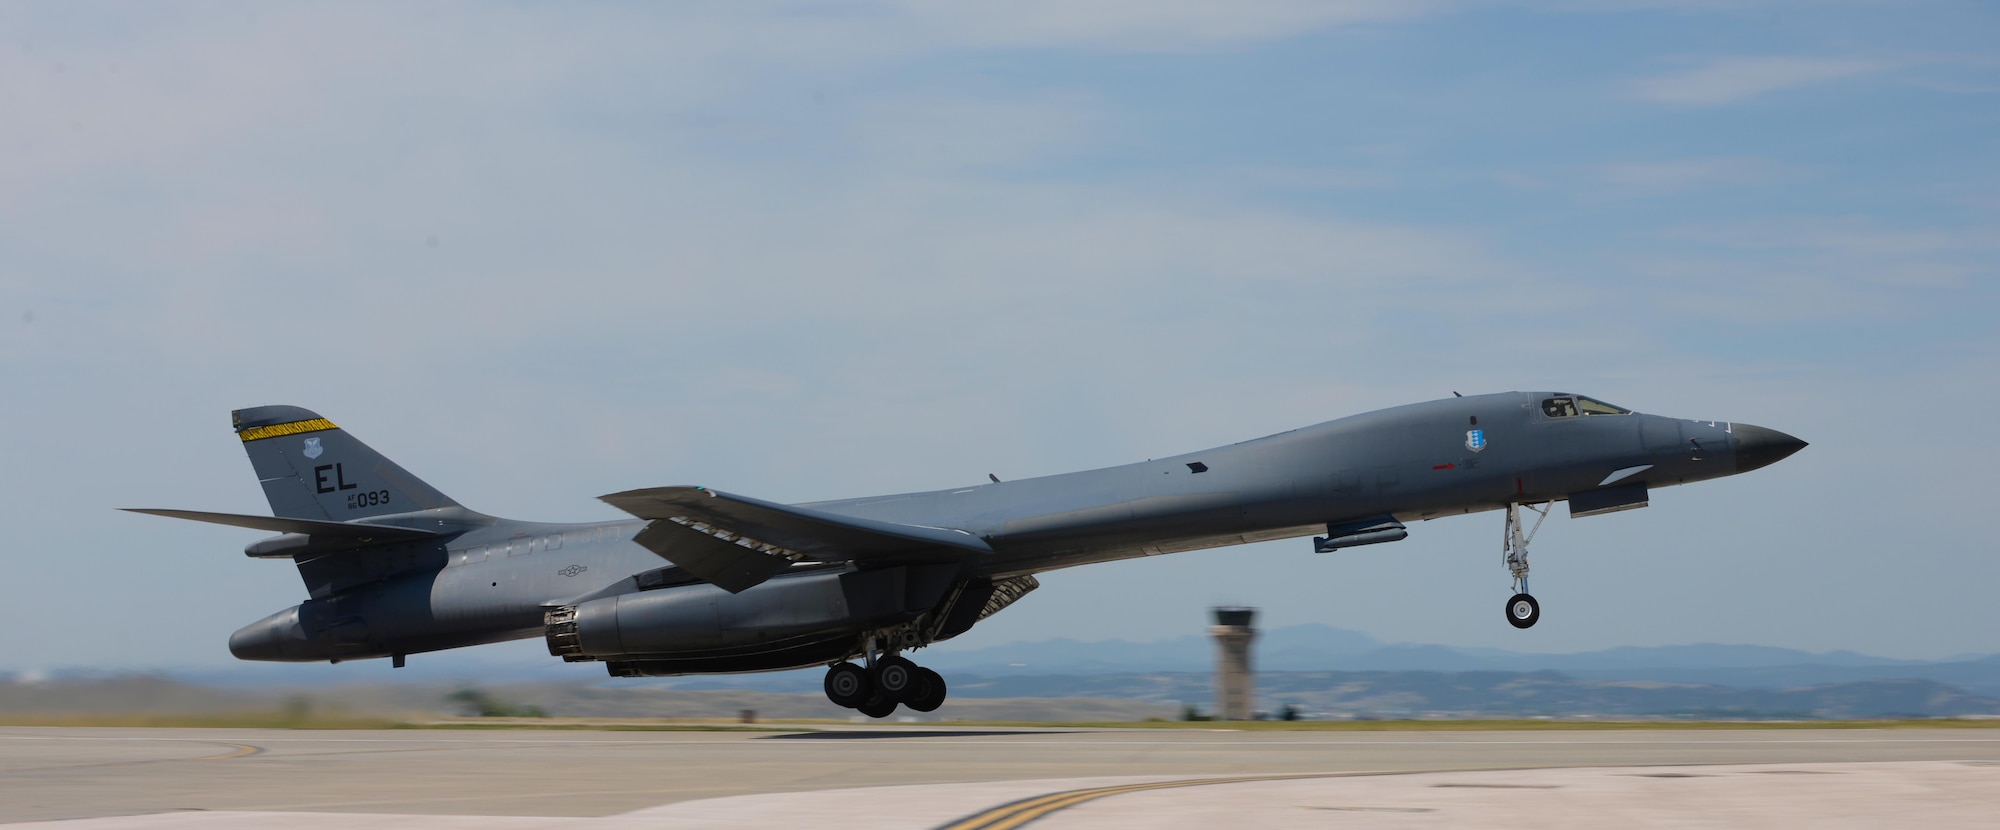 A B-1 Bomber takes off from Ellsworth Air Force Base, S.D., July 6, 2017. The aircraft is one of five B-1s that will take part in Red Fag – a joint exercise taking place at the Nevada Test and Training Range, near Nellis AFB, Nev. (U.S. Air Force photo by Airman Nicolas Z. Erwin)